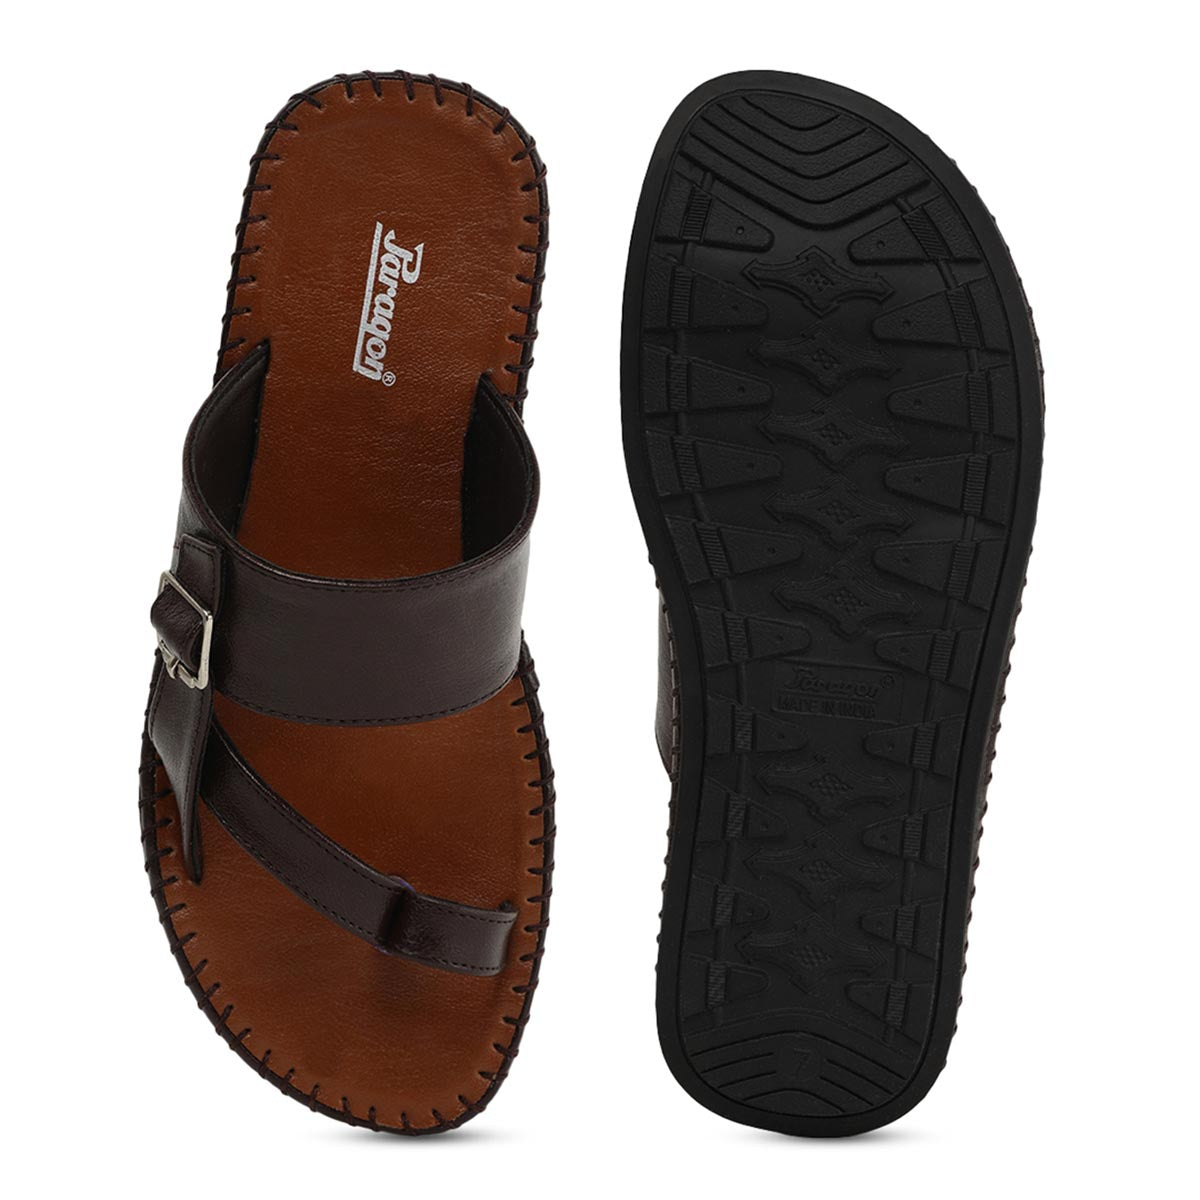 Paragon K2001G Men Stylish Sandals | Comfortable Sandals for Daily Outdoor Use | Casual Formal Sandals with Cushioned Soles